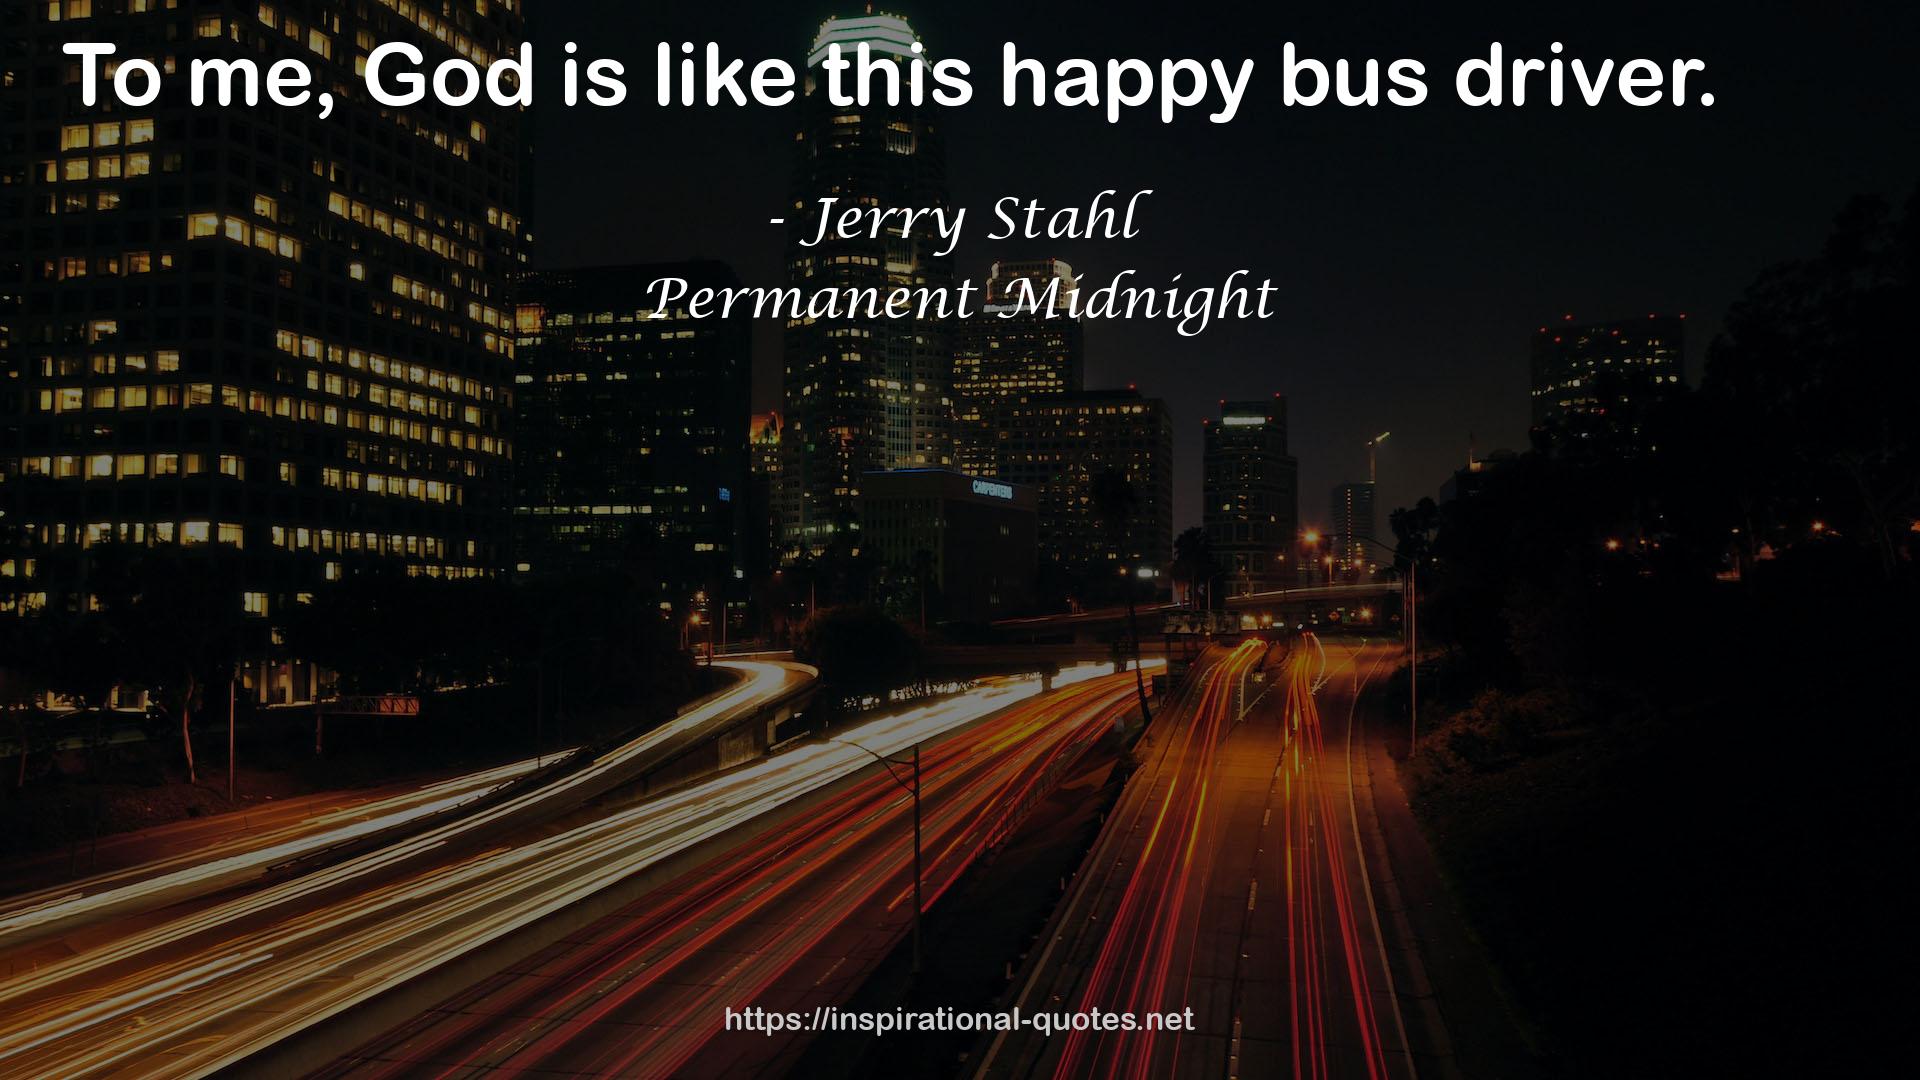 Jerry Stahl QUOTES